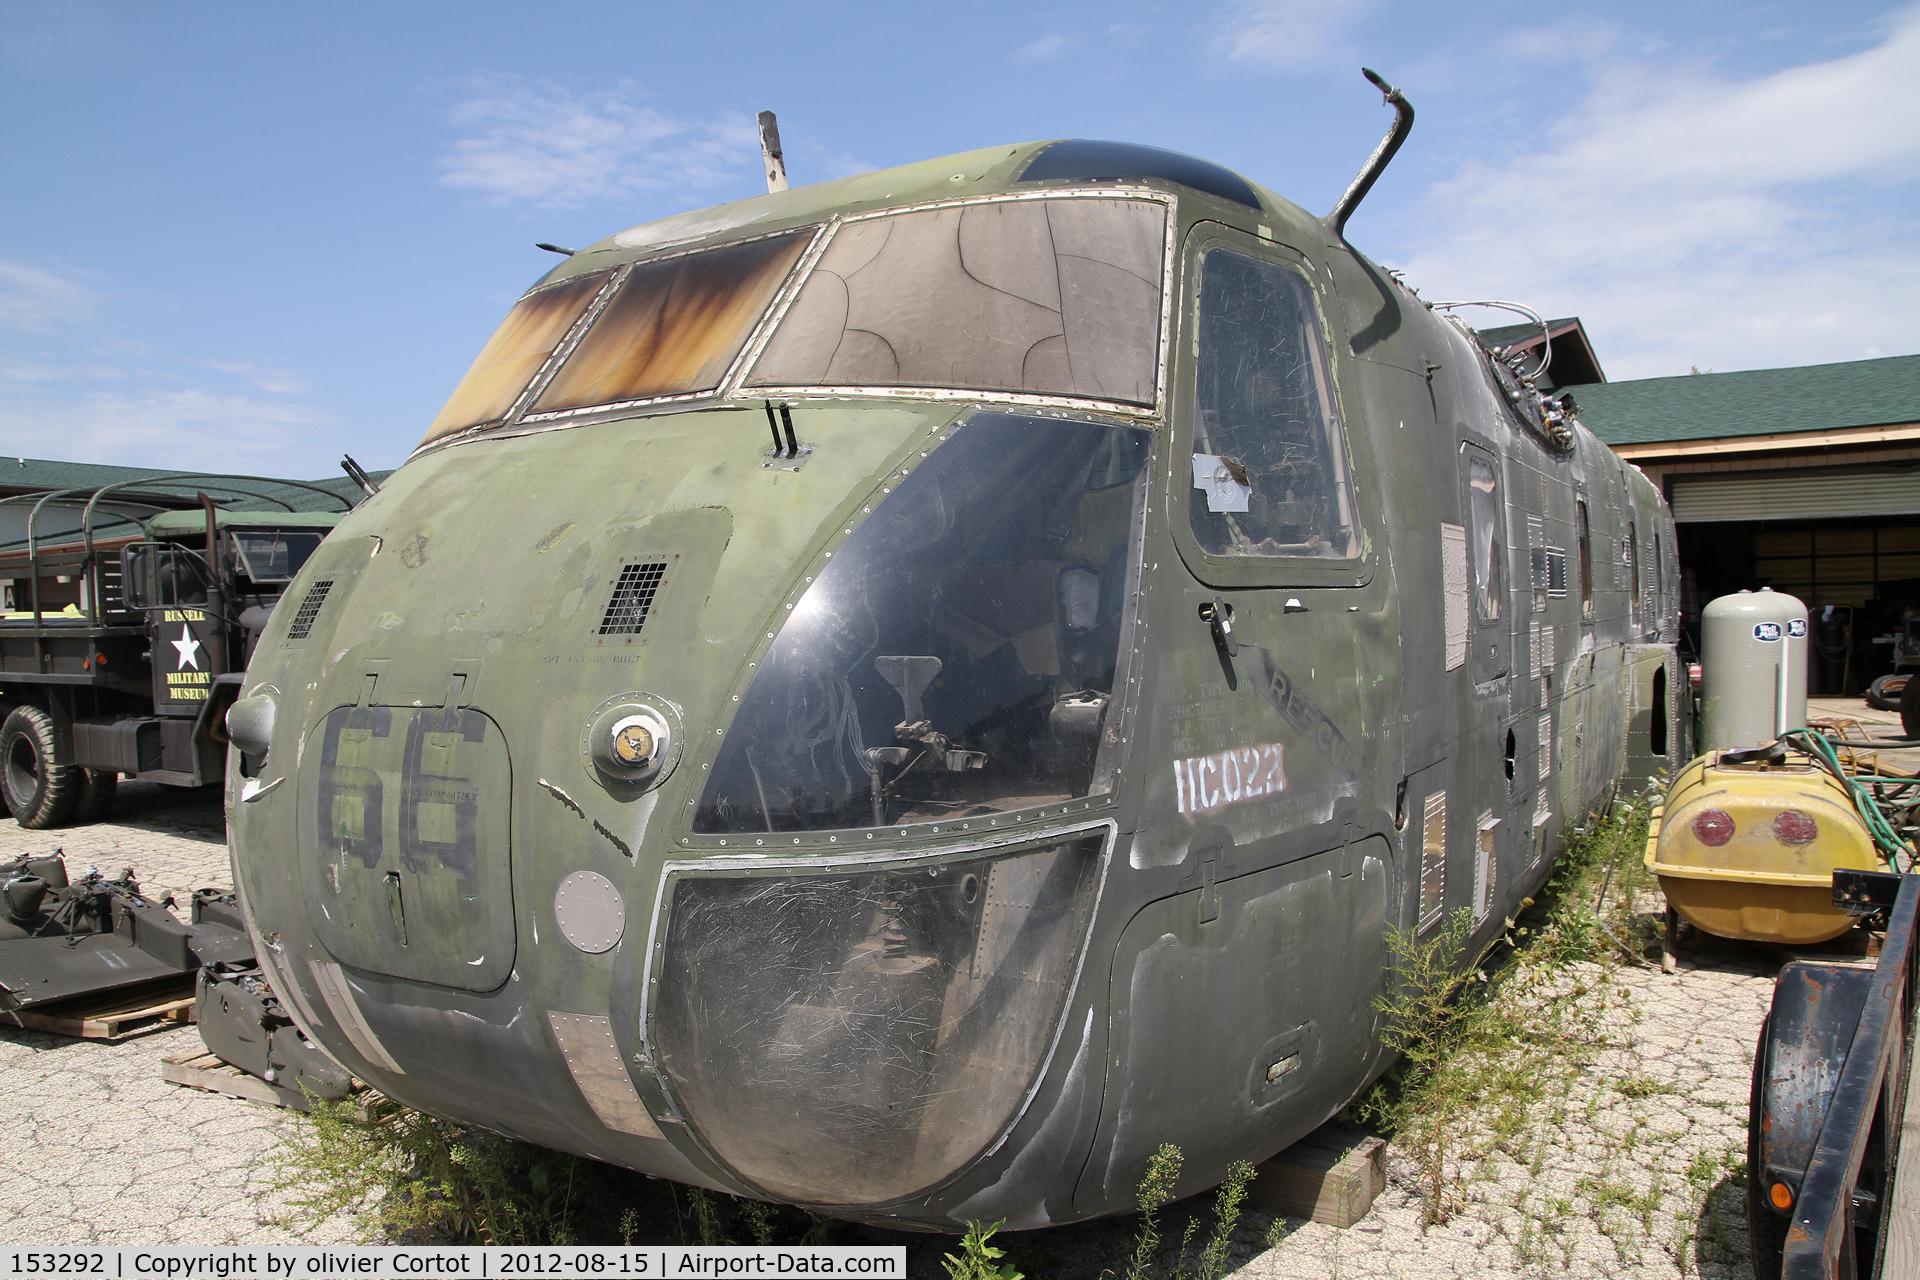 153292, 1967 Sikorsky CH-53A Sea Stallion C/N 65-061, Now at the Russel military museum